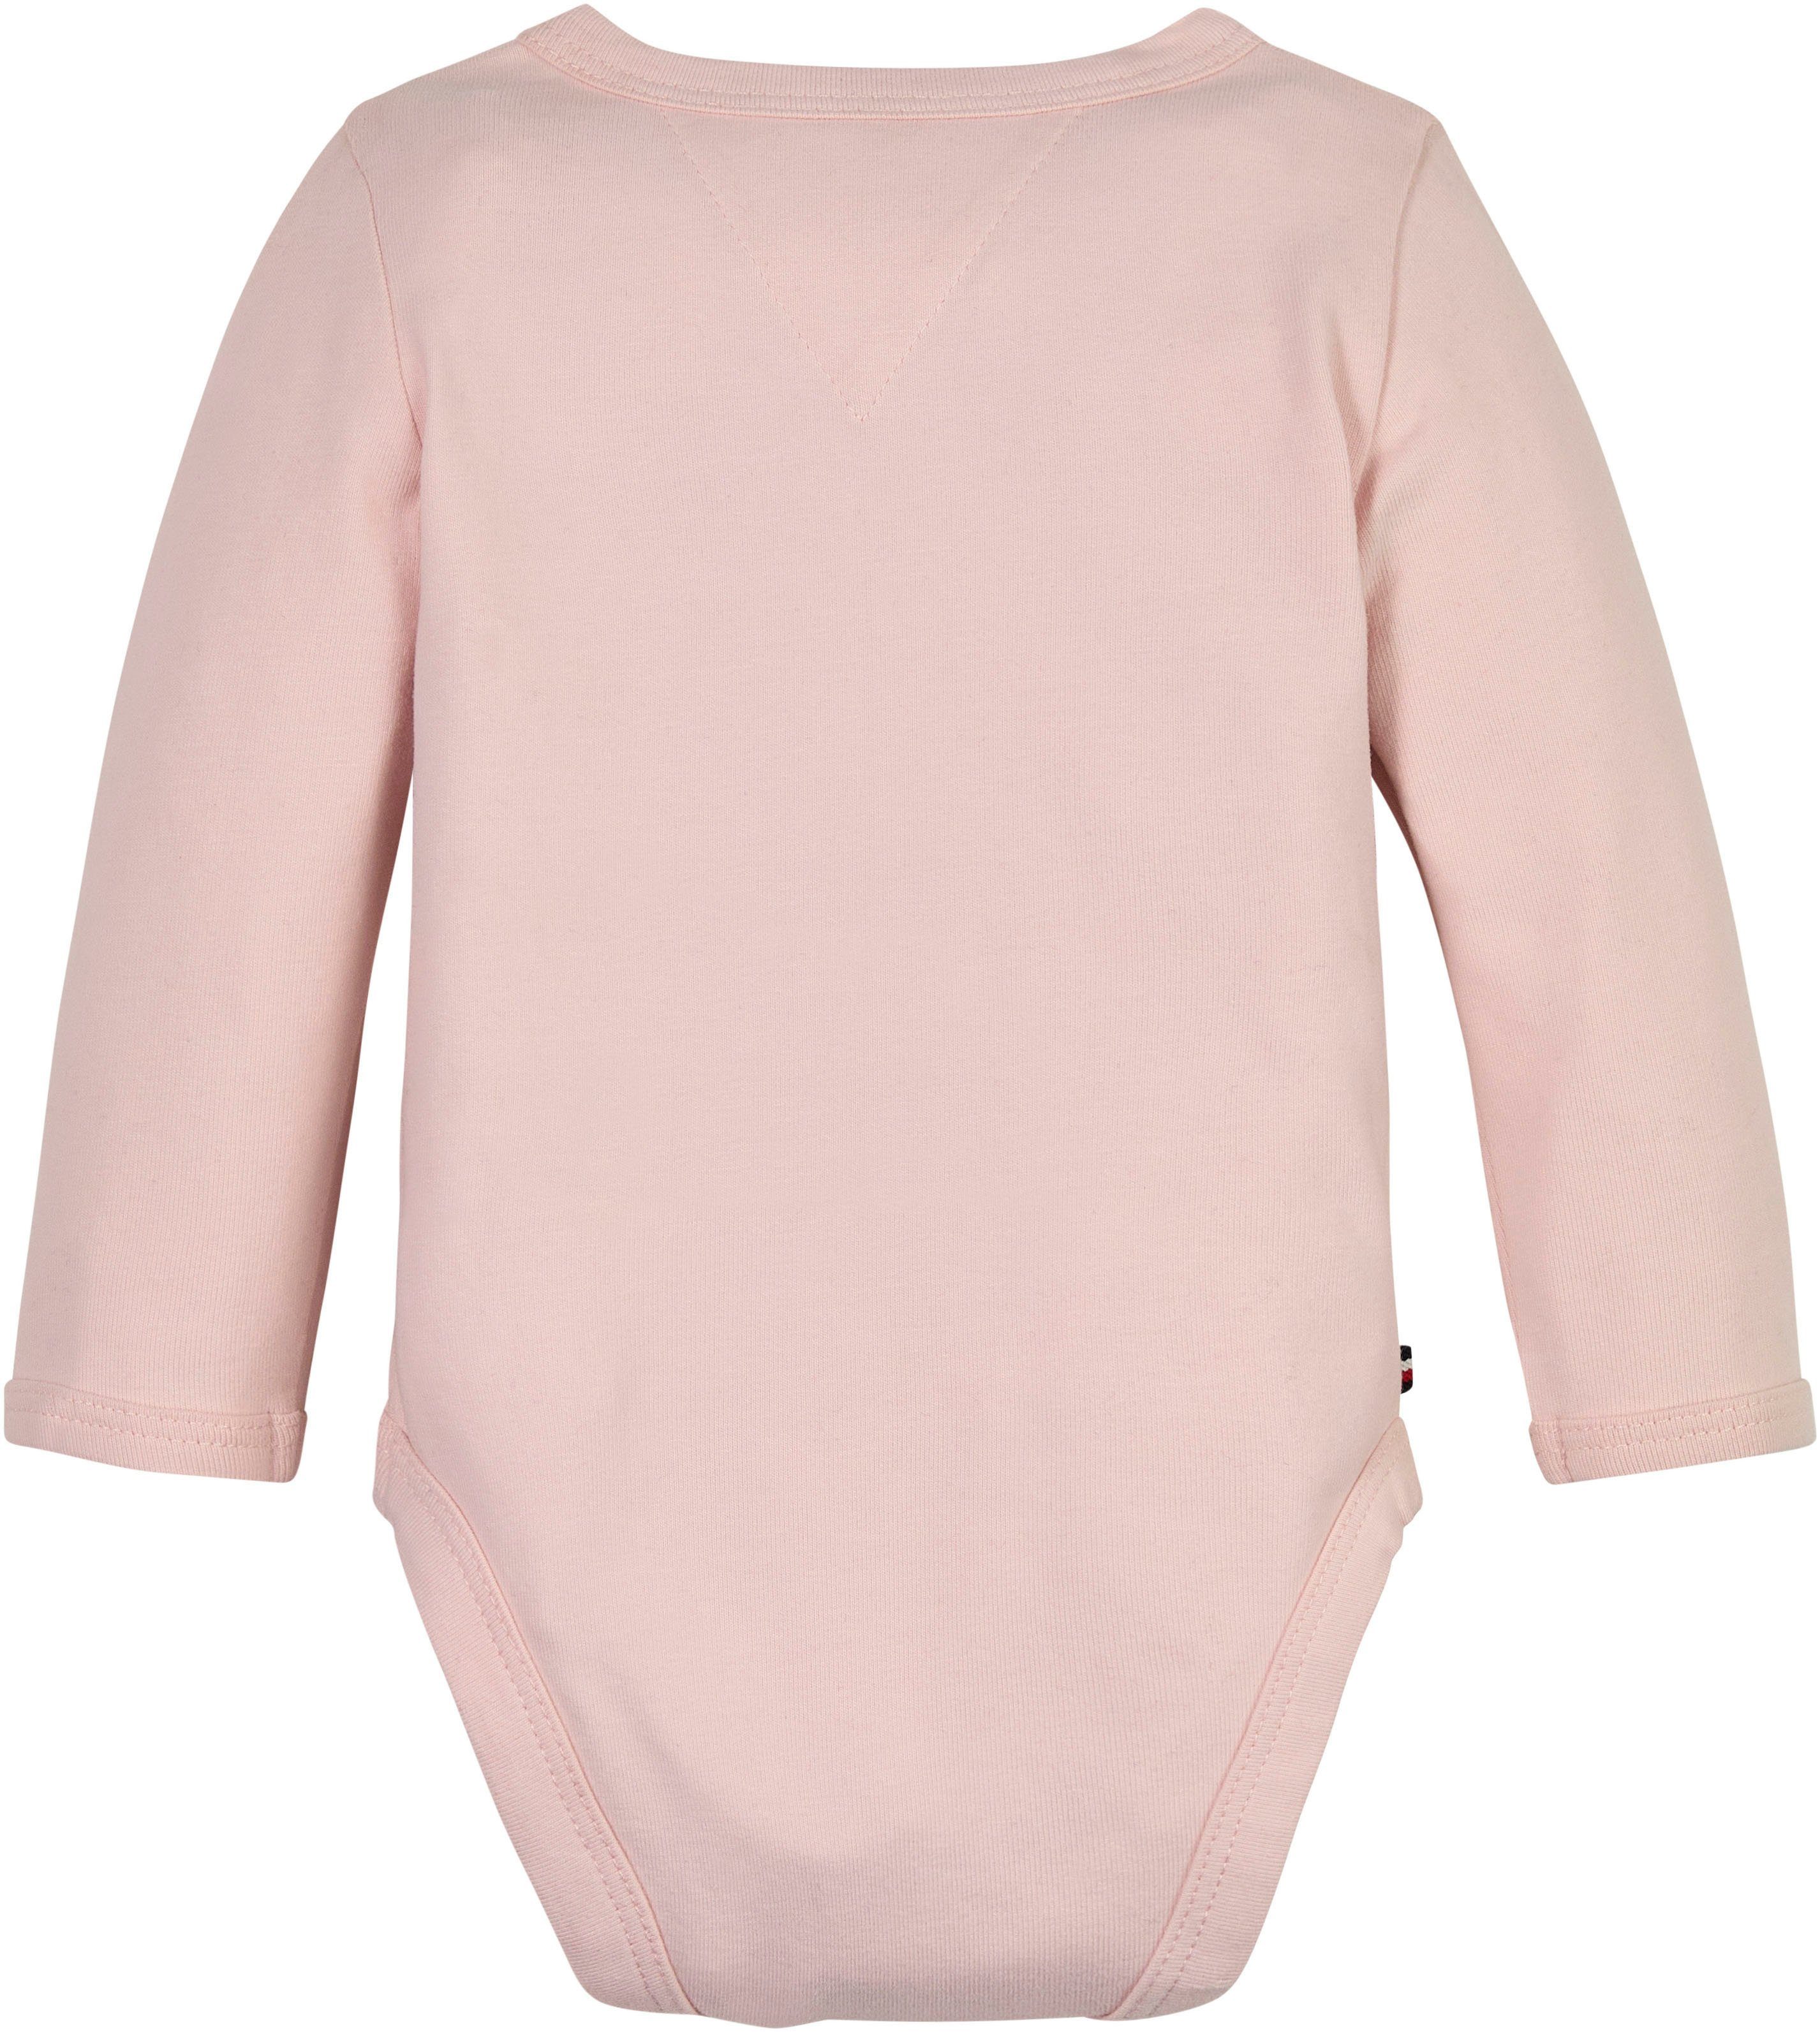 TH Overall Tommy Hilfiger L/S Logoschriftzug Pink mit BODY BABY LOGO Whimsy